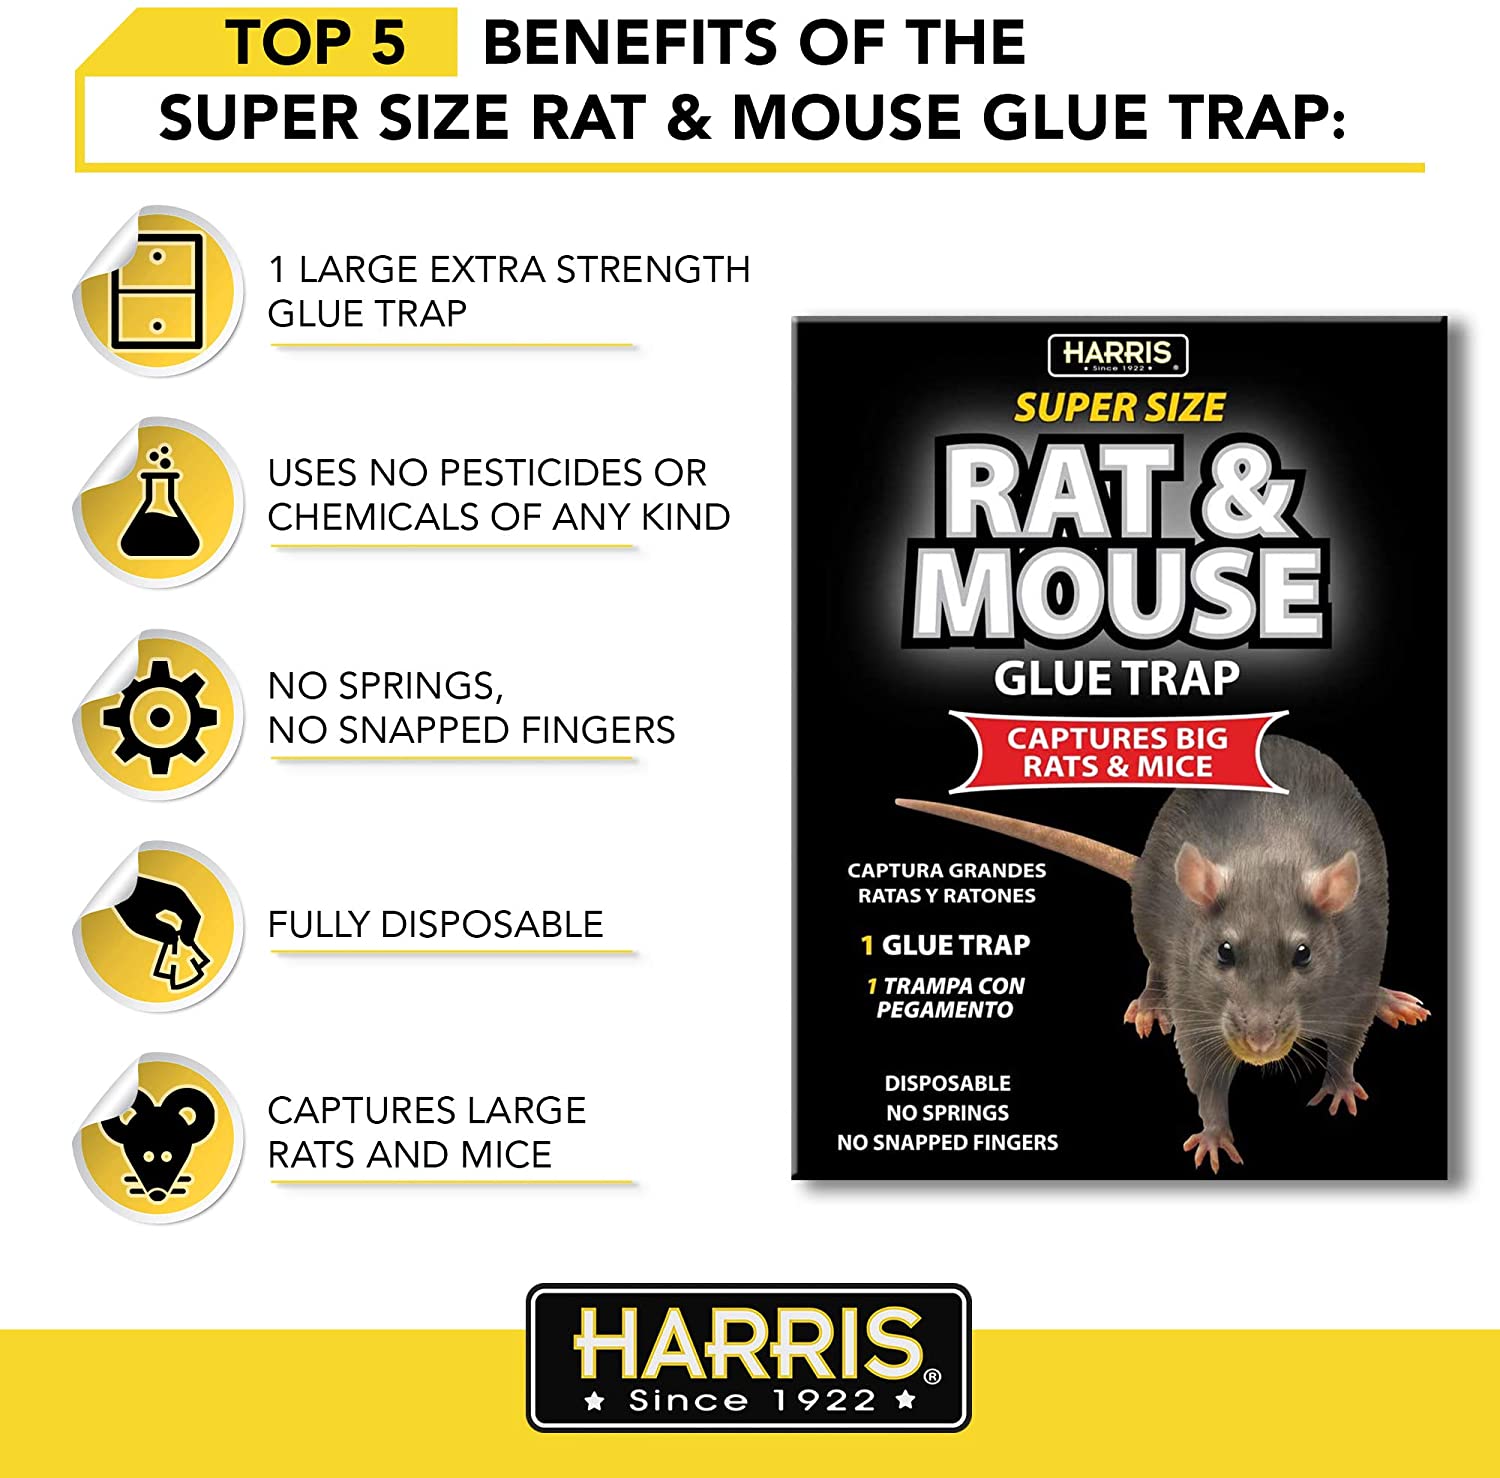 Harris Dry Up Rat and Mouse Killer Bars